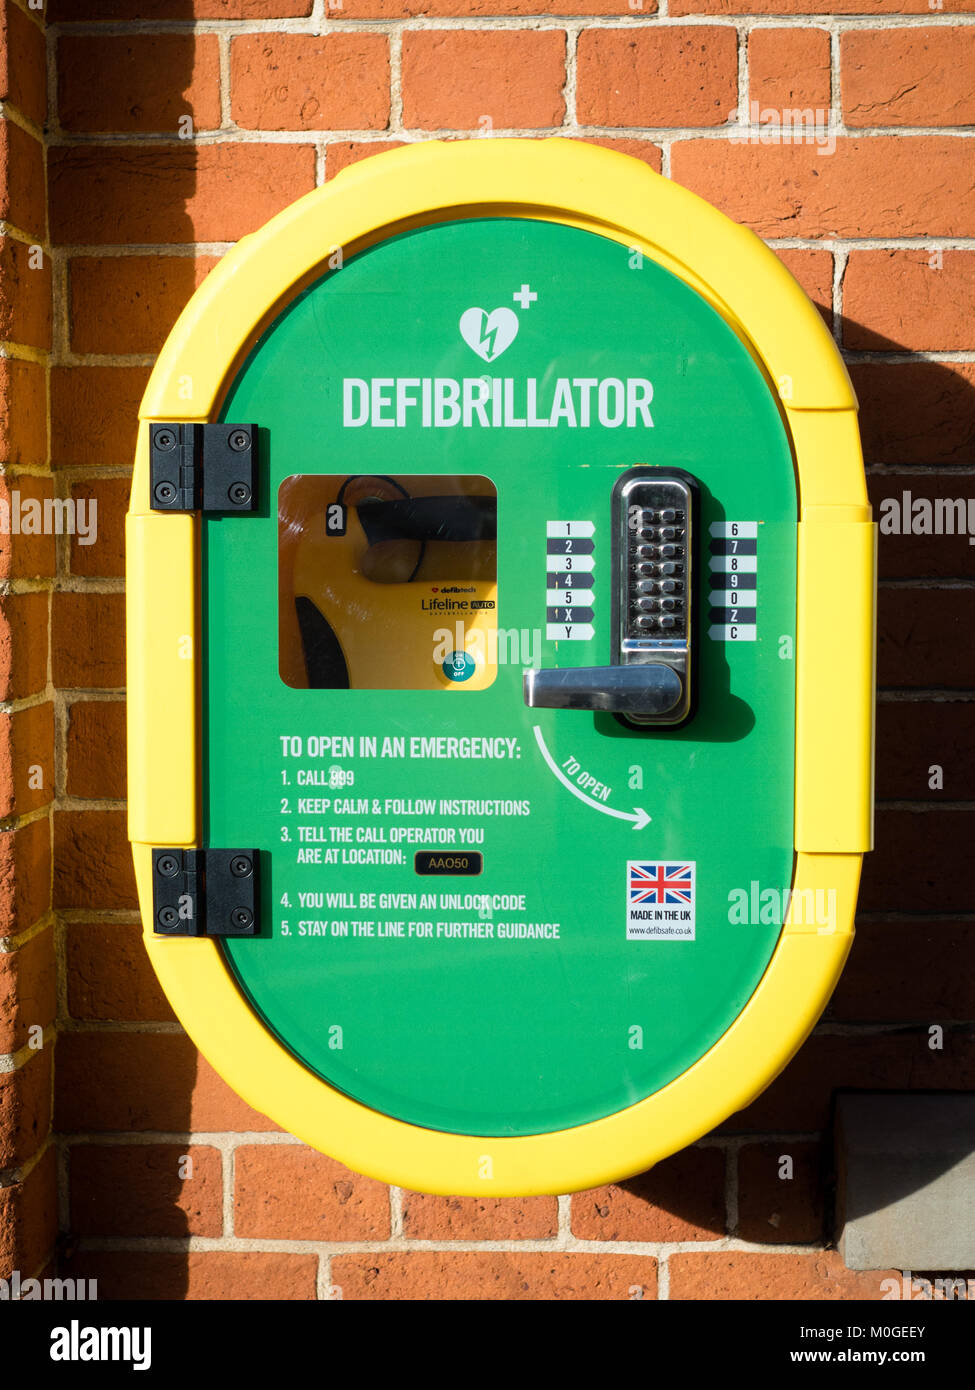 Public Defibrillator on a wall. The user dials 999 to get the open code before using the Defibtech Lifeline auto defibrillator. Stock Photo